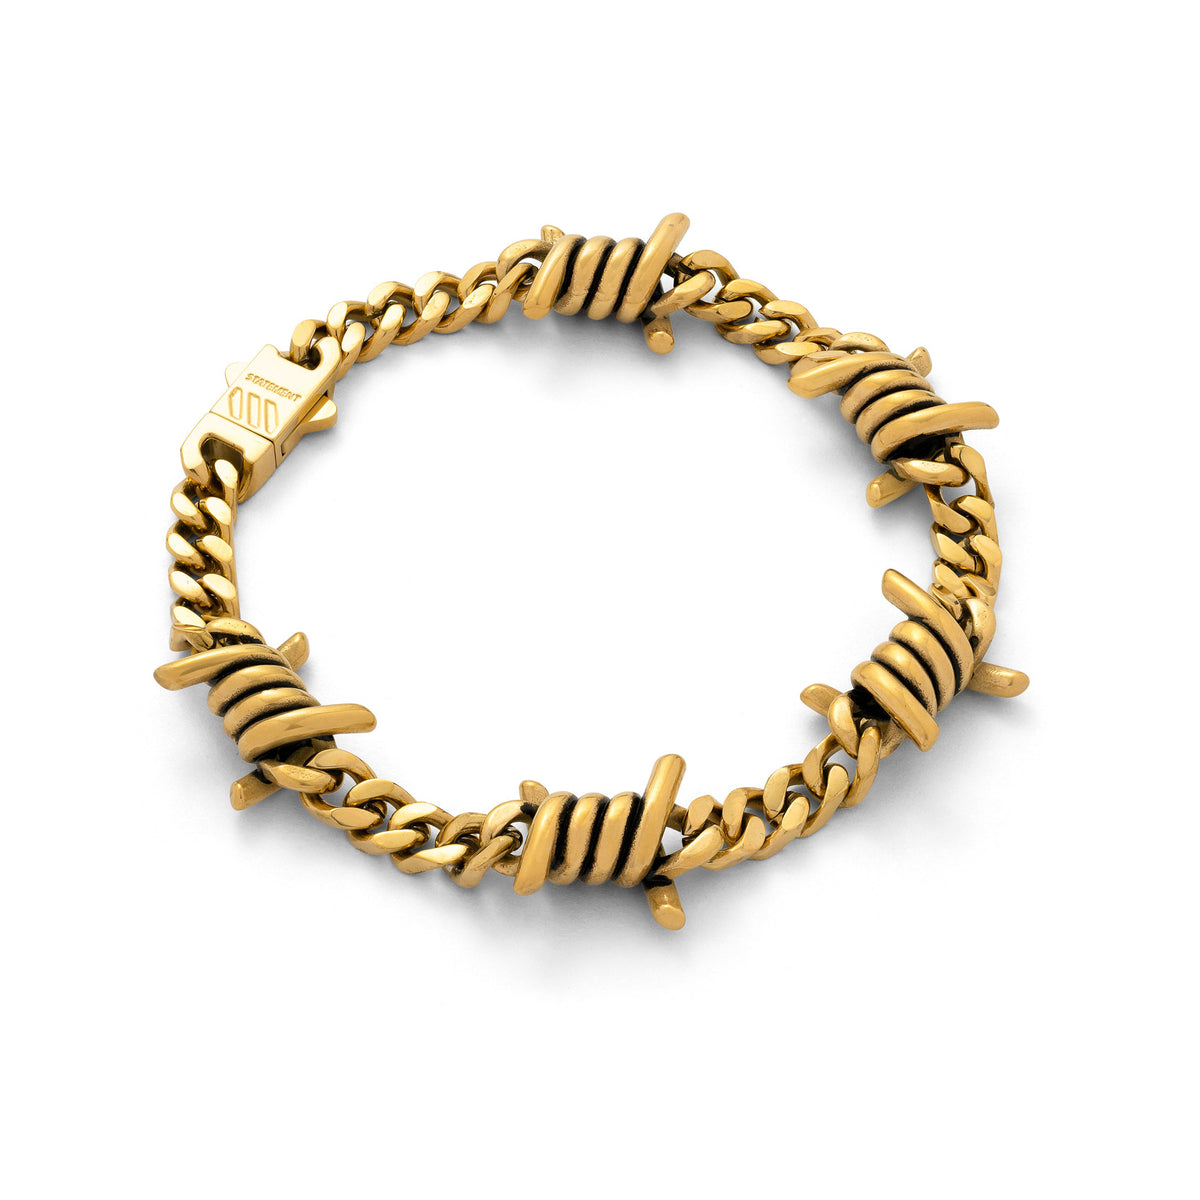 Unisex charm bracelet with barbed wire pendants in gold